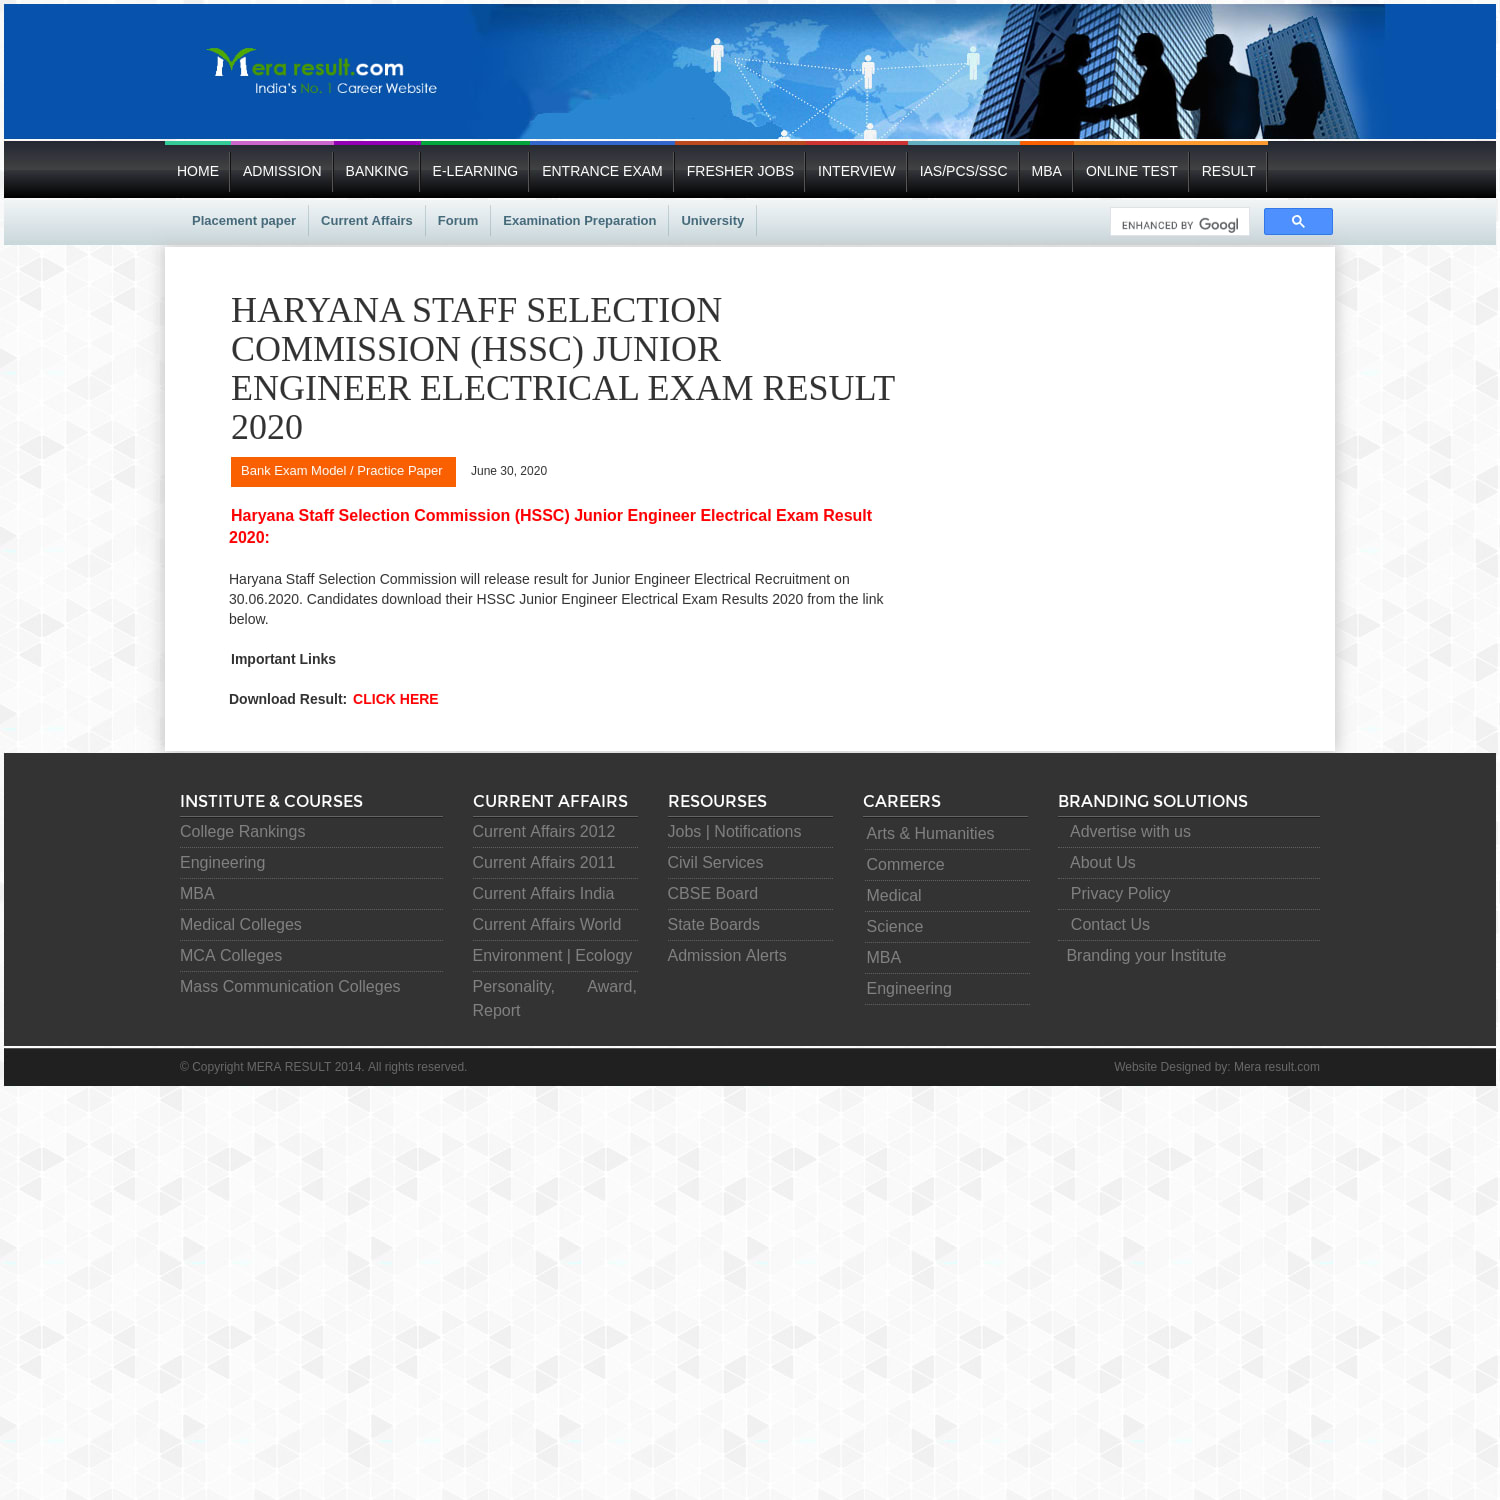 Haryana Staff Selection Commission (HSSC) Junior Engineer Electrical Exam Result 2020